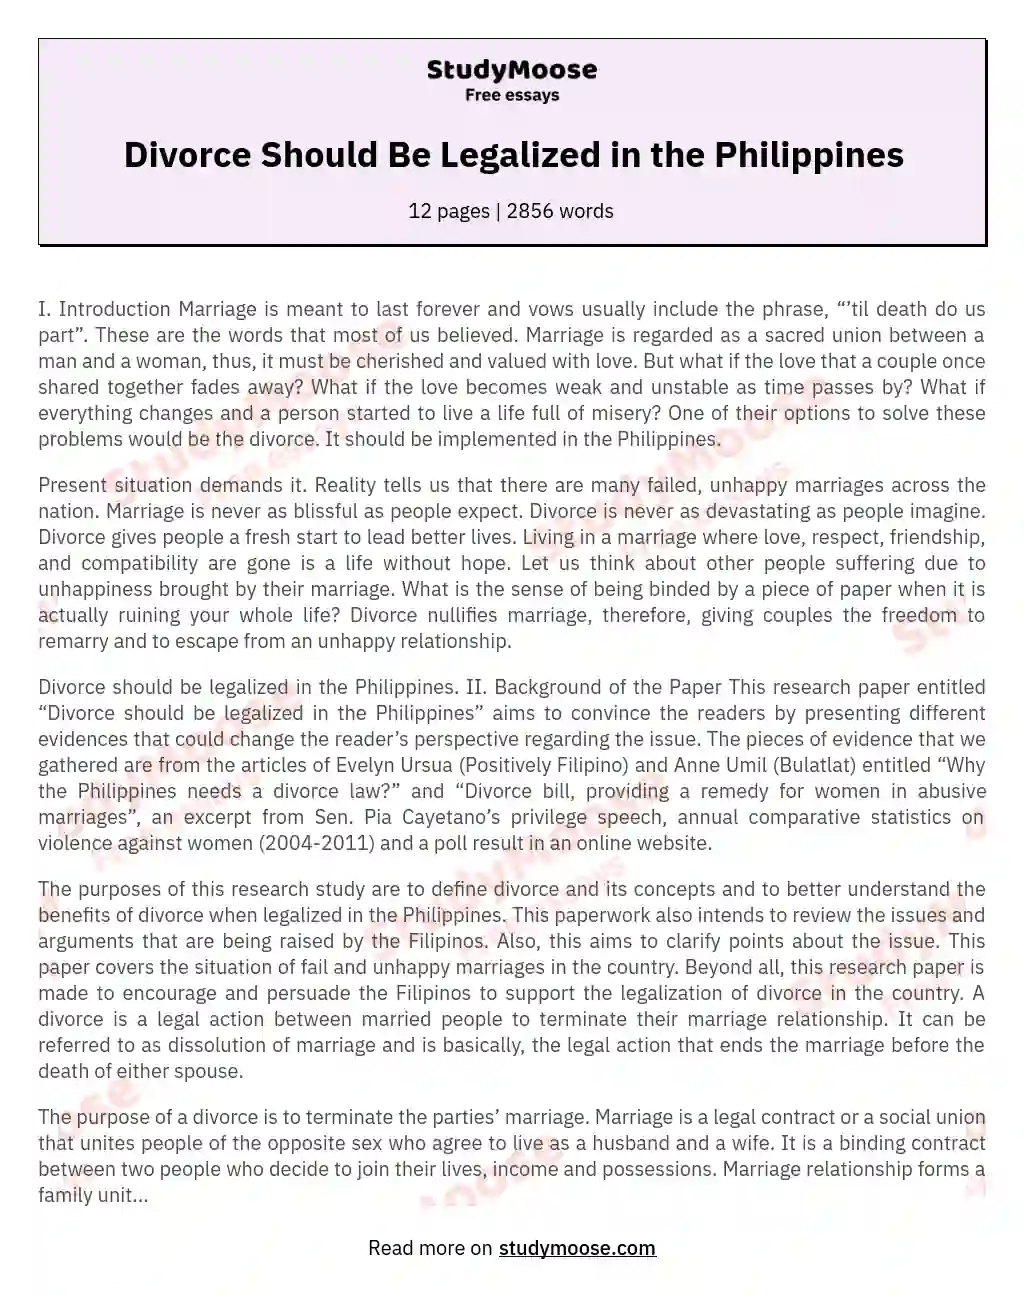 Divorce Should Be Legalized in the Philippines essay